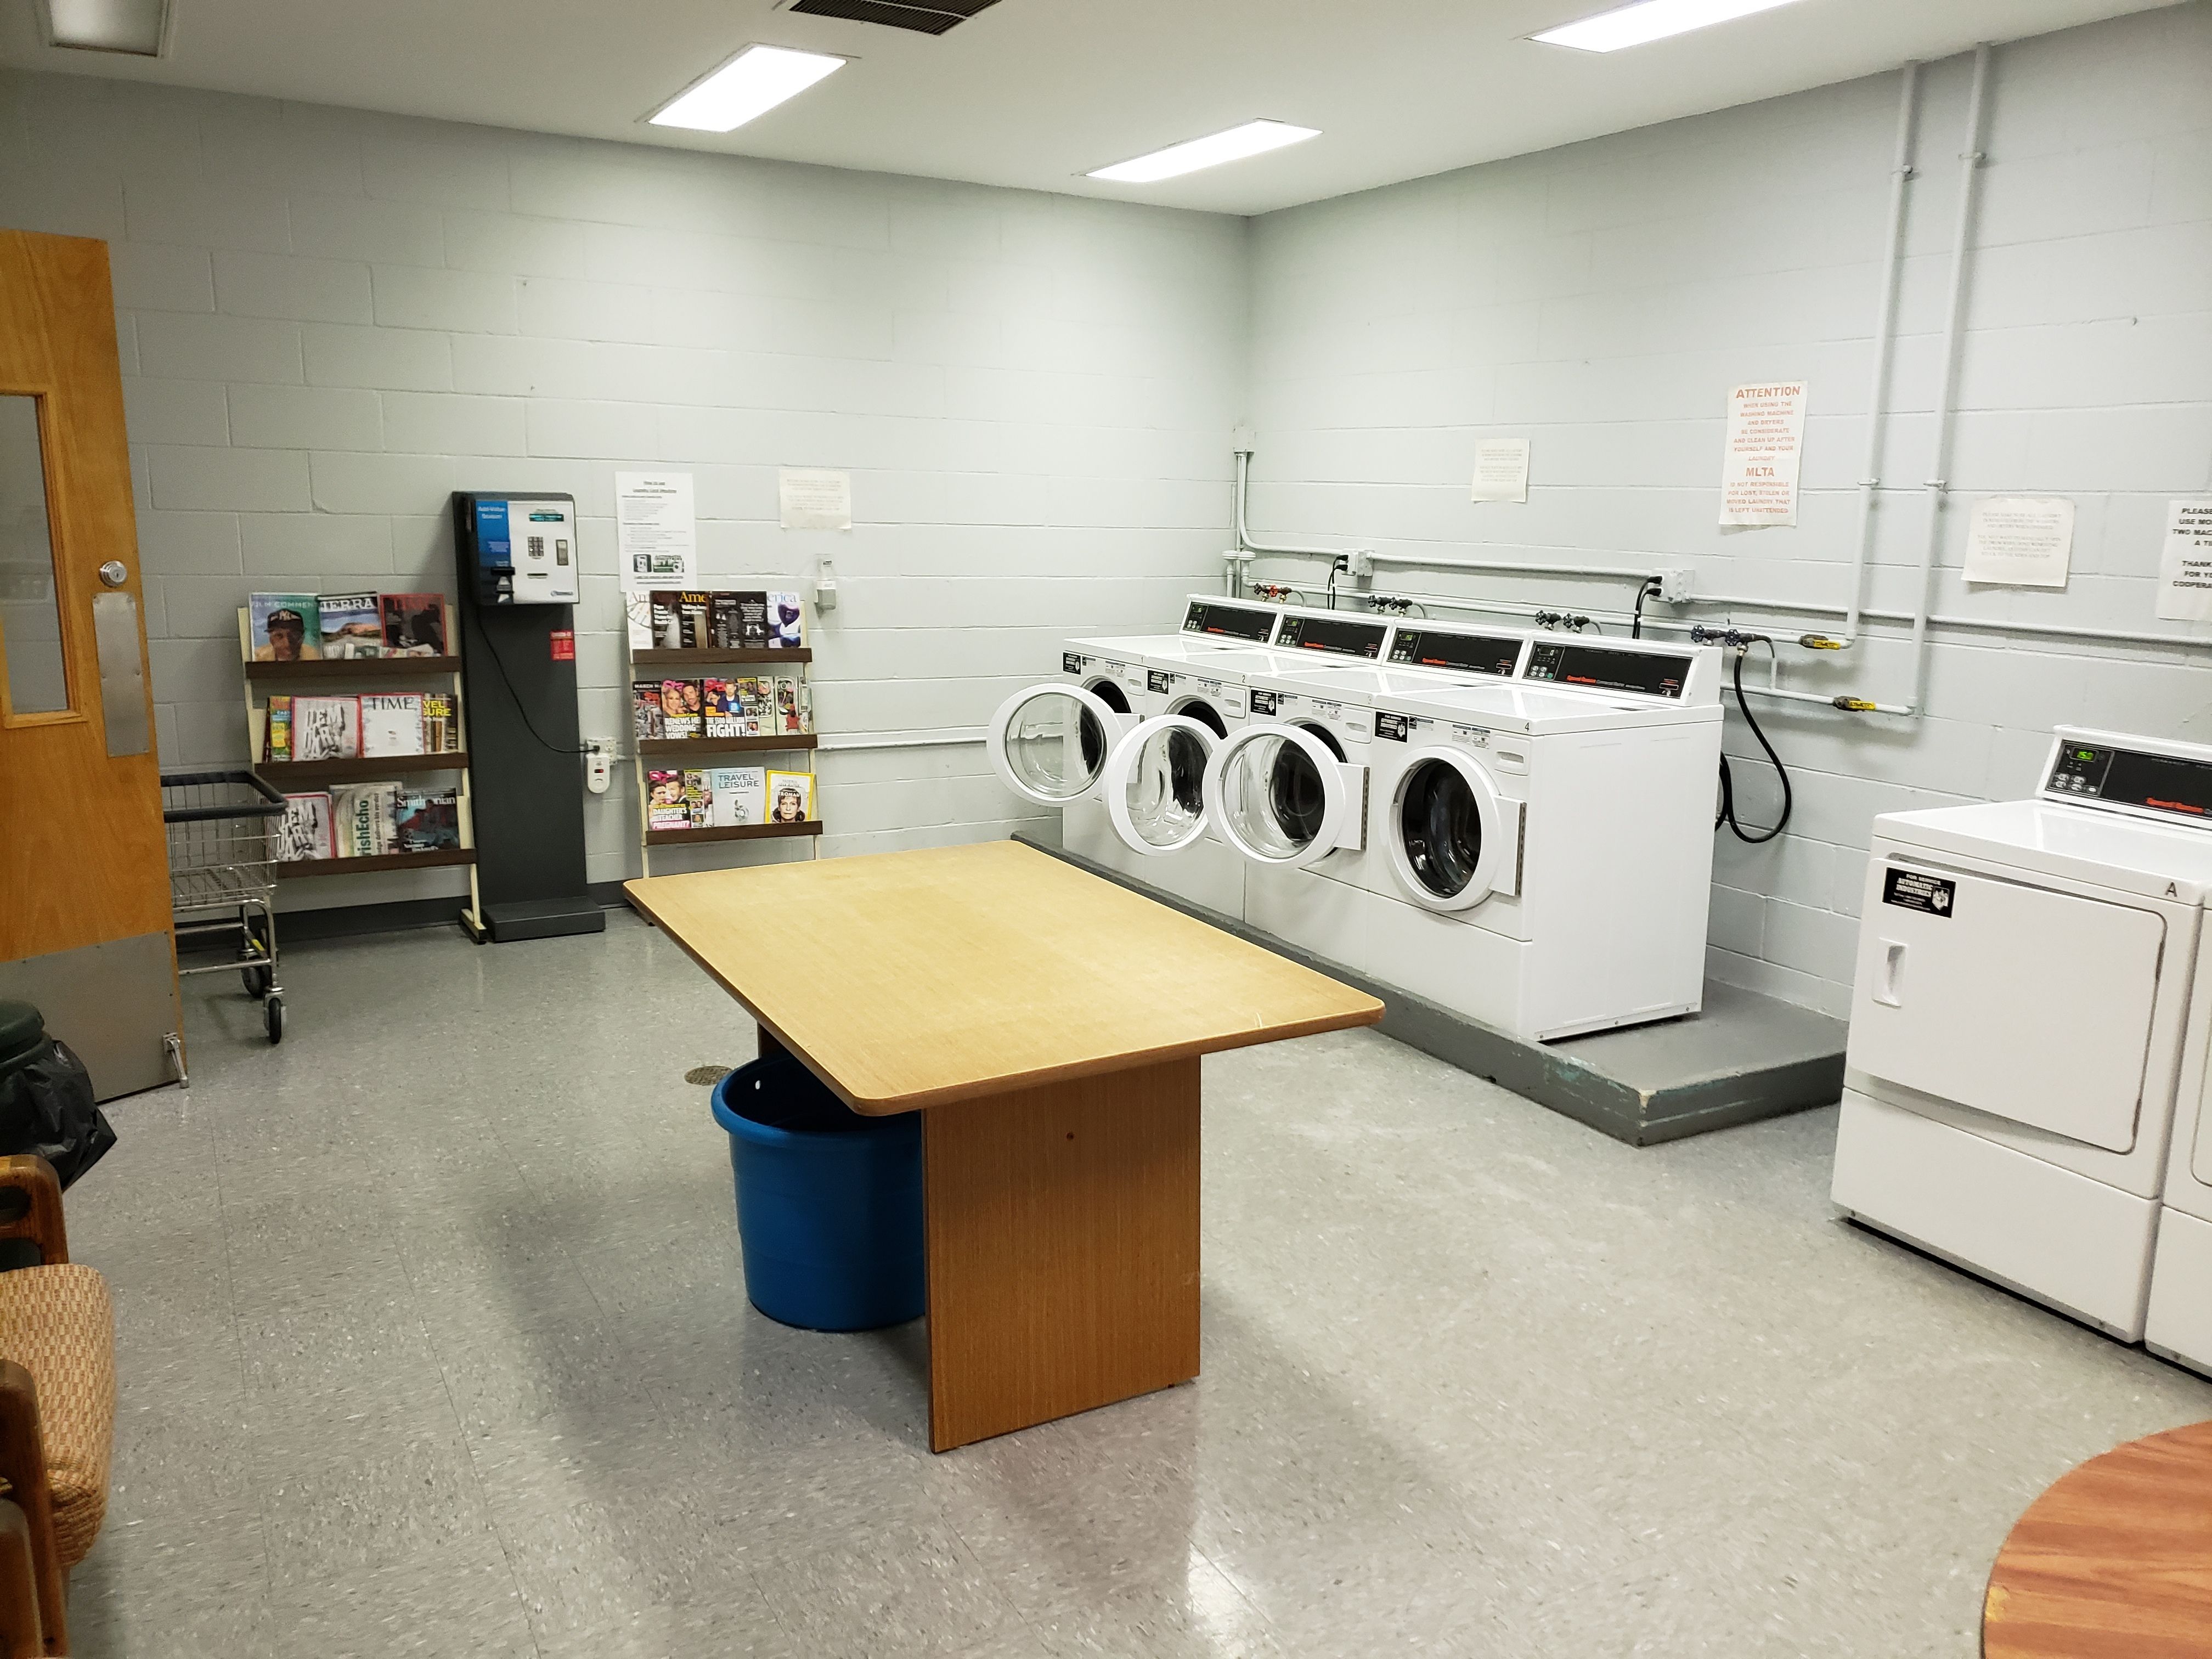 Laundry Room in Community Building